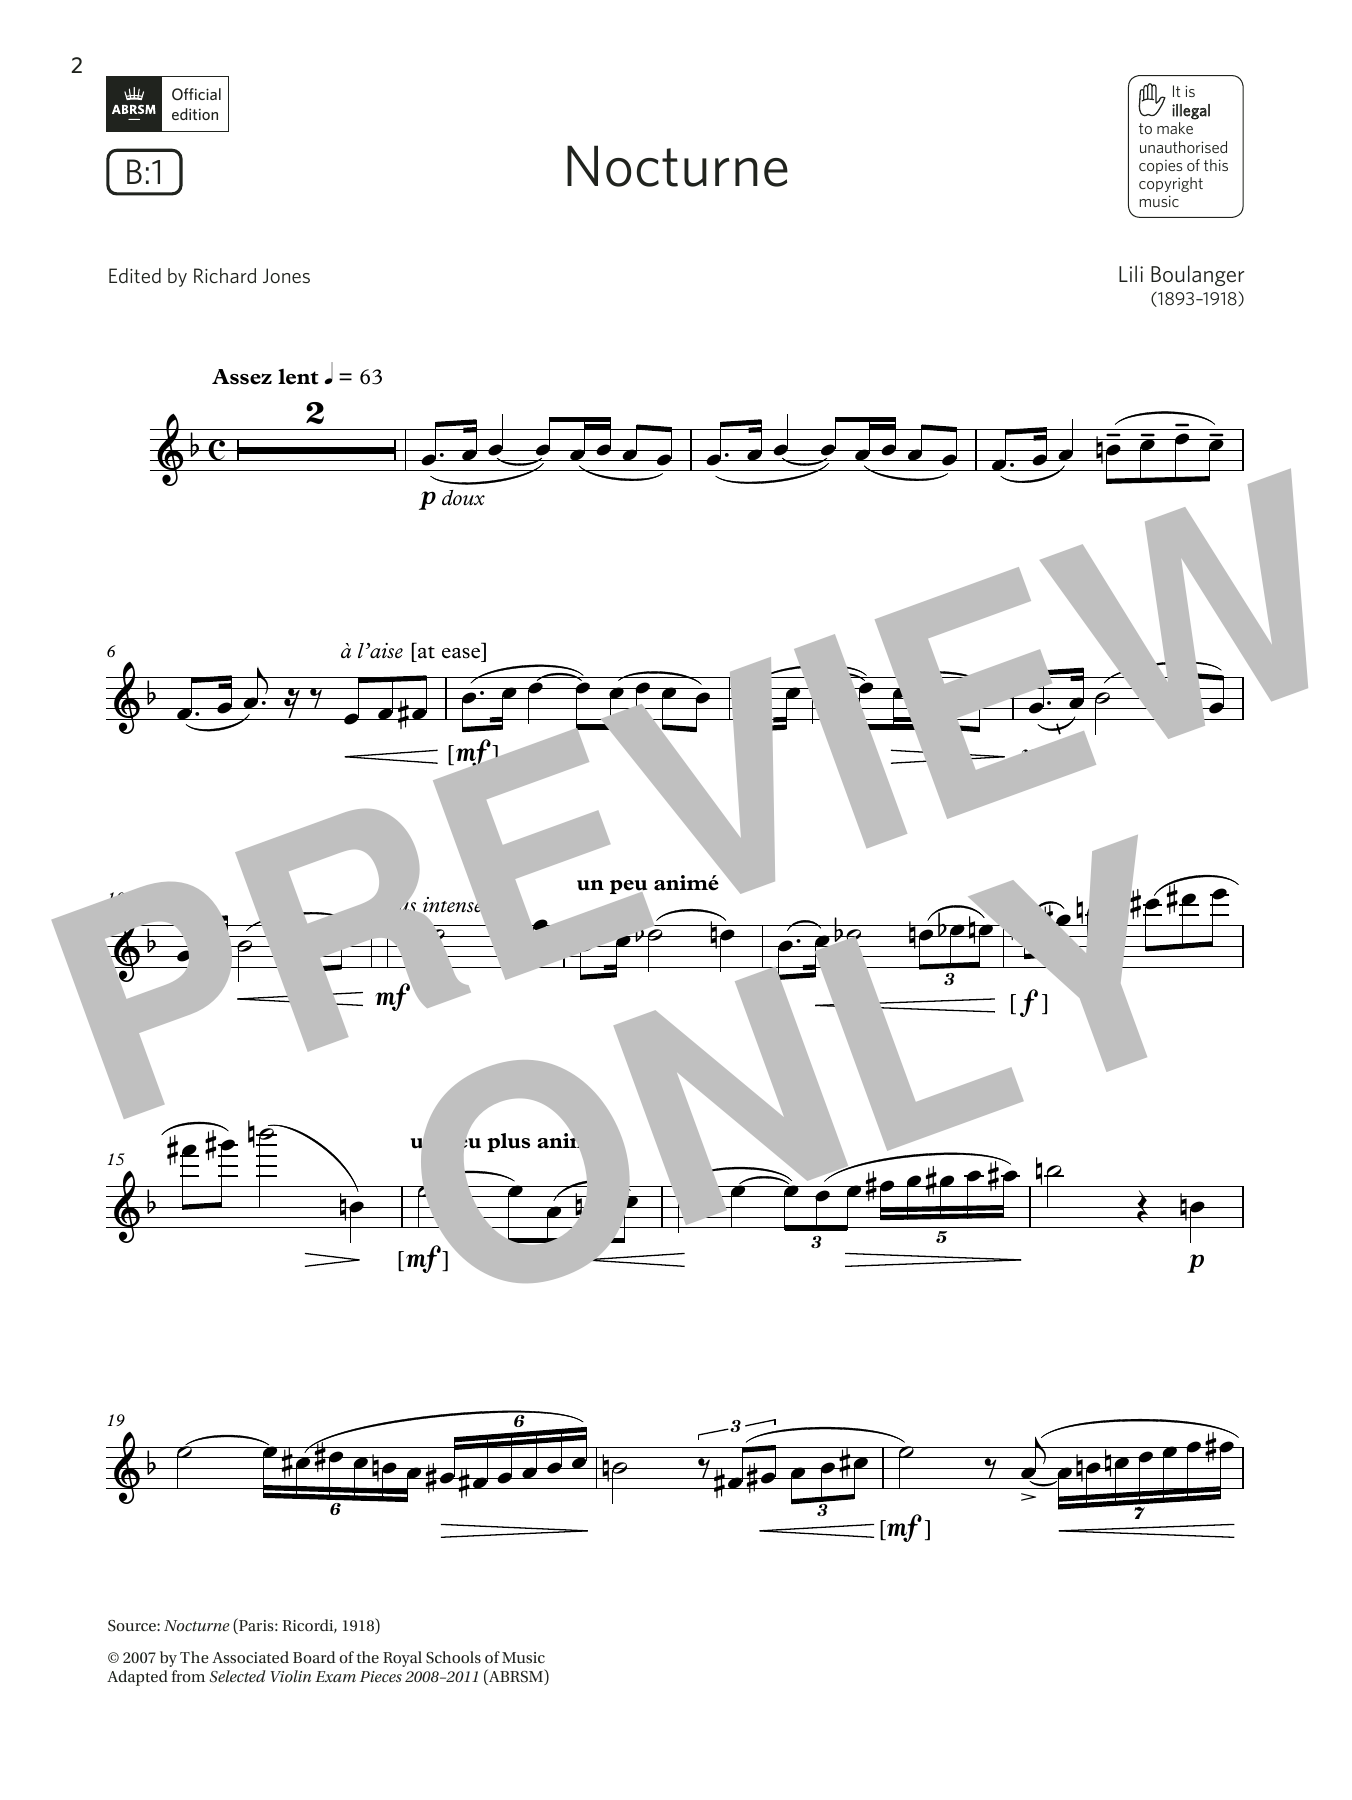 Download Lili Boulanger Nocturne (Grade 7 List B1 from the ABRS Sheet Music